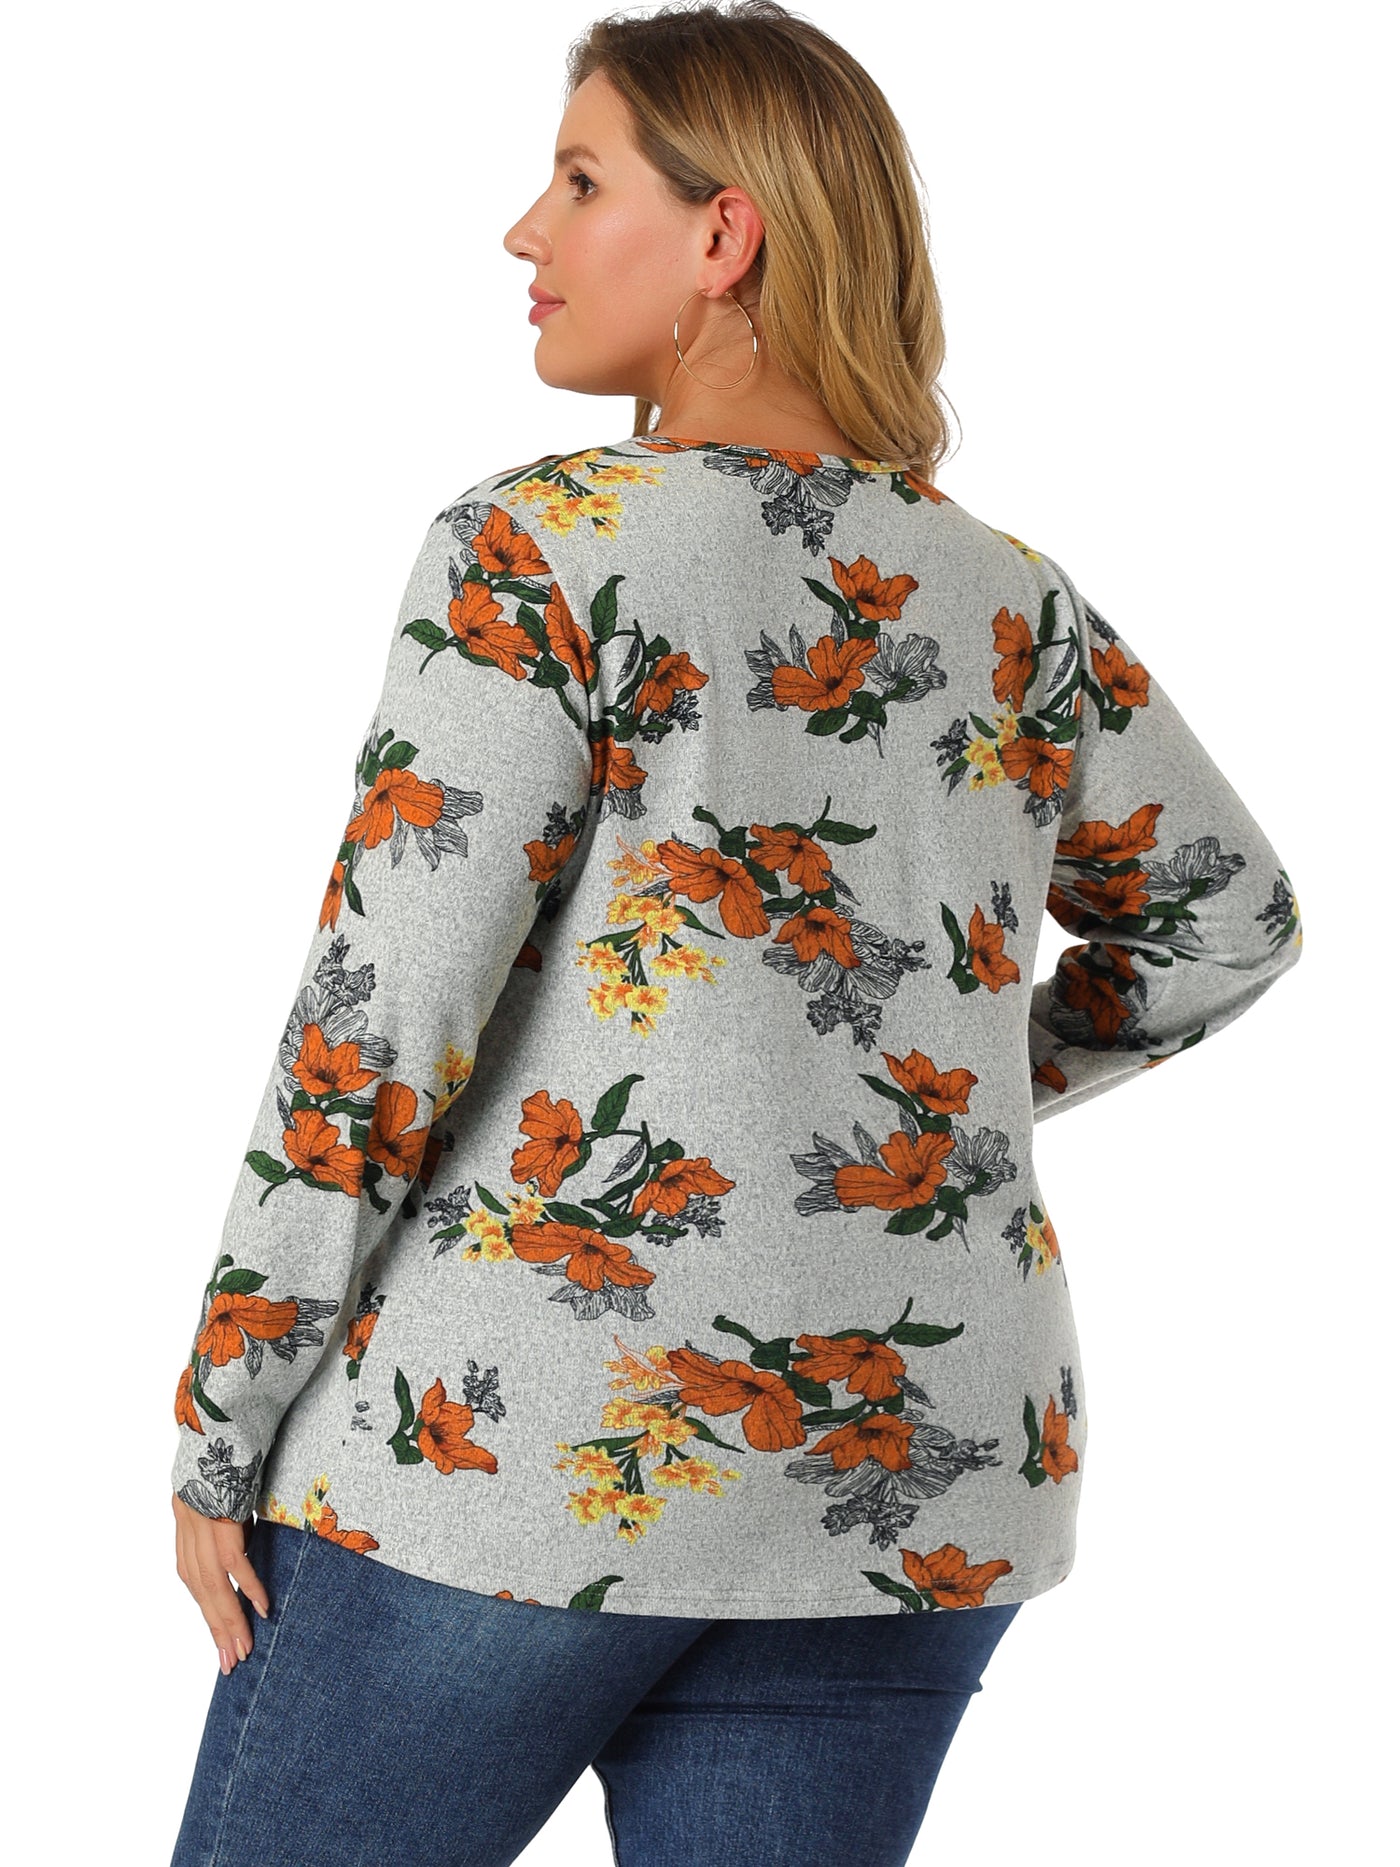 Bublédon Knit Relax Fit Floral Printed V Neck Long Sleeve Shirt